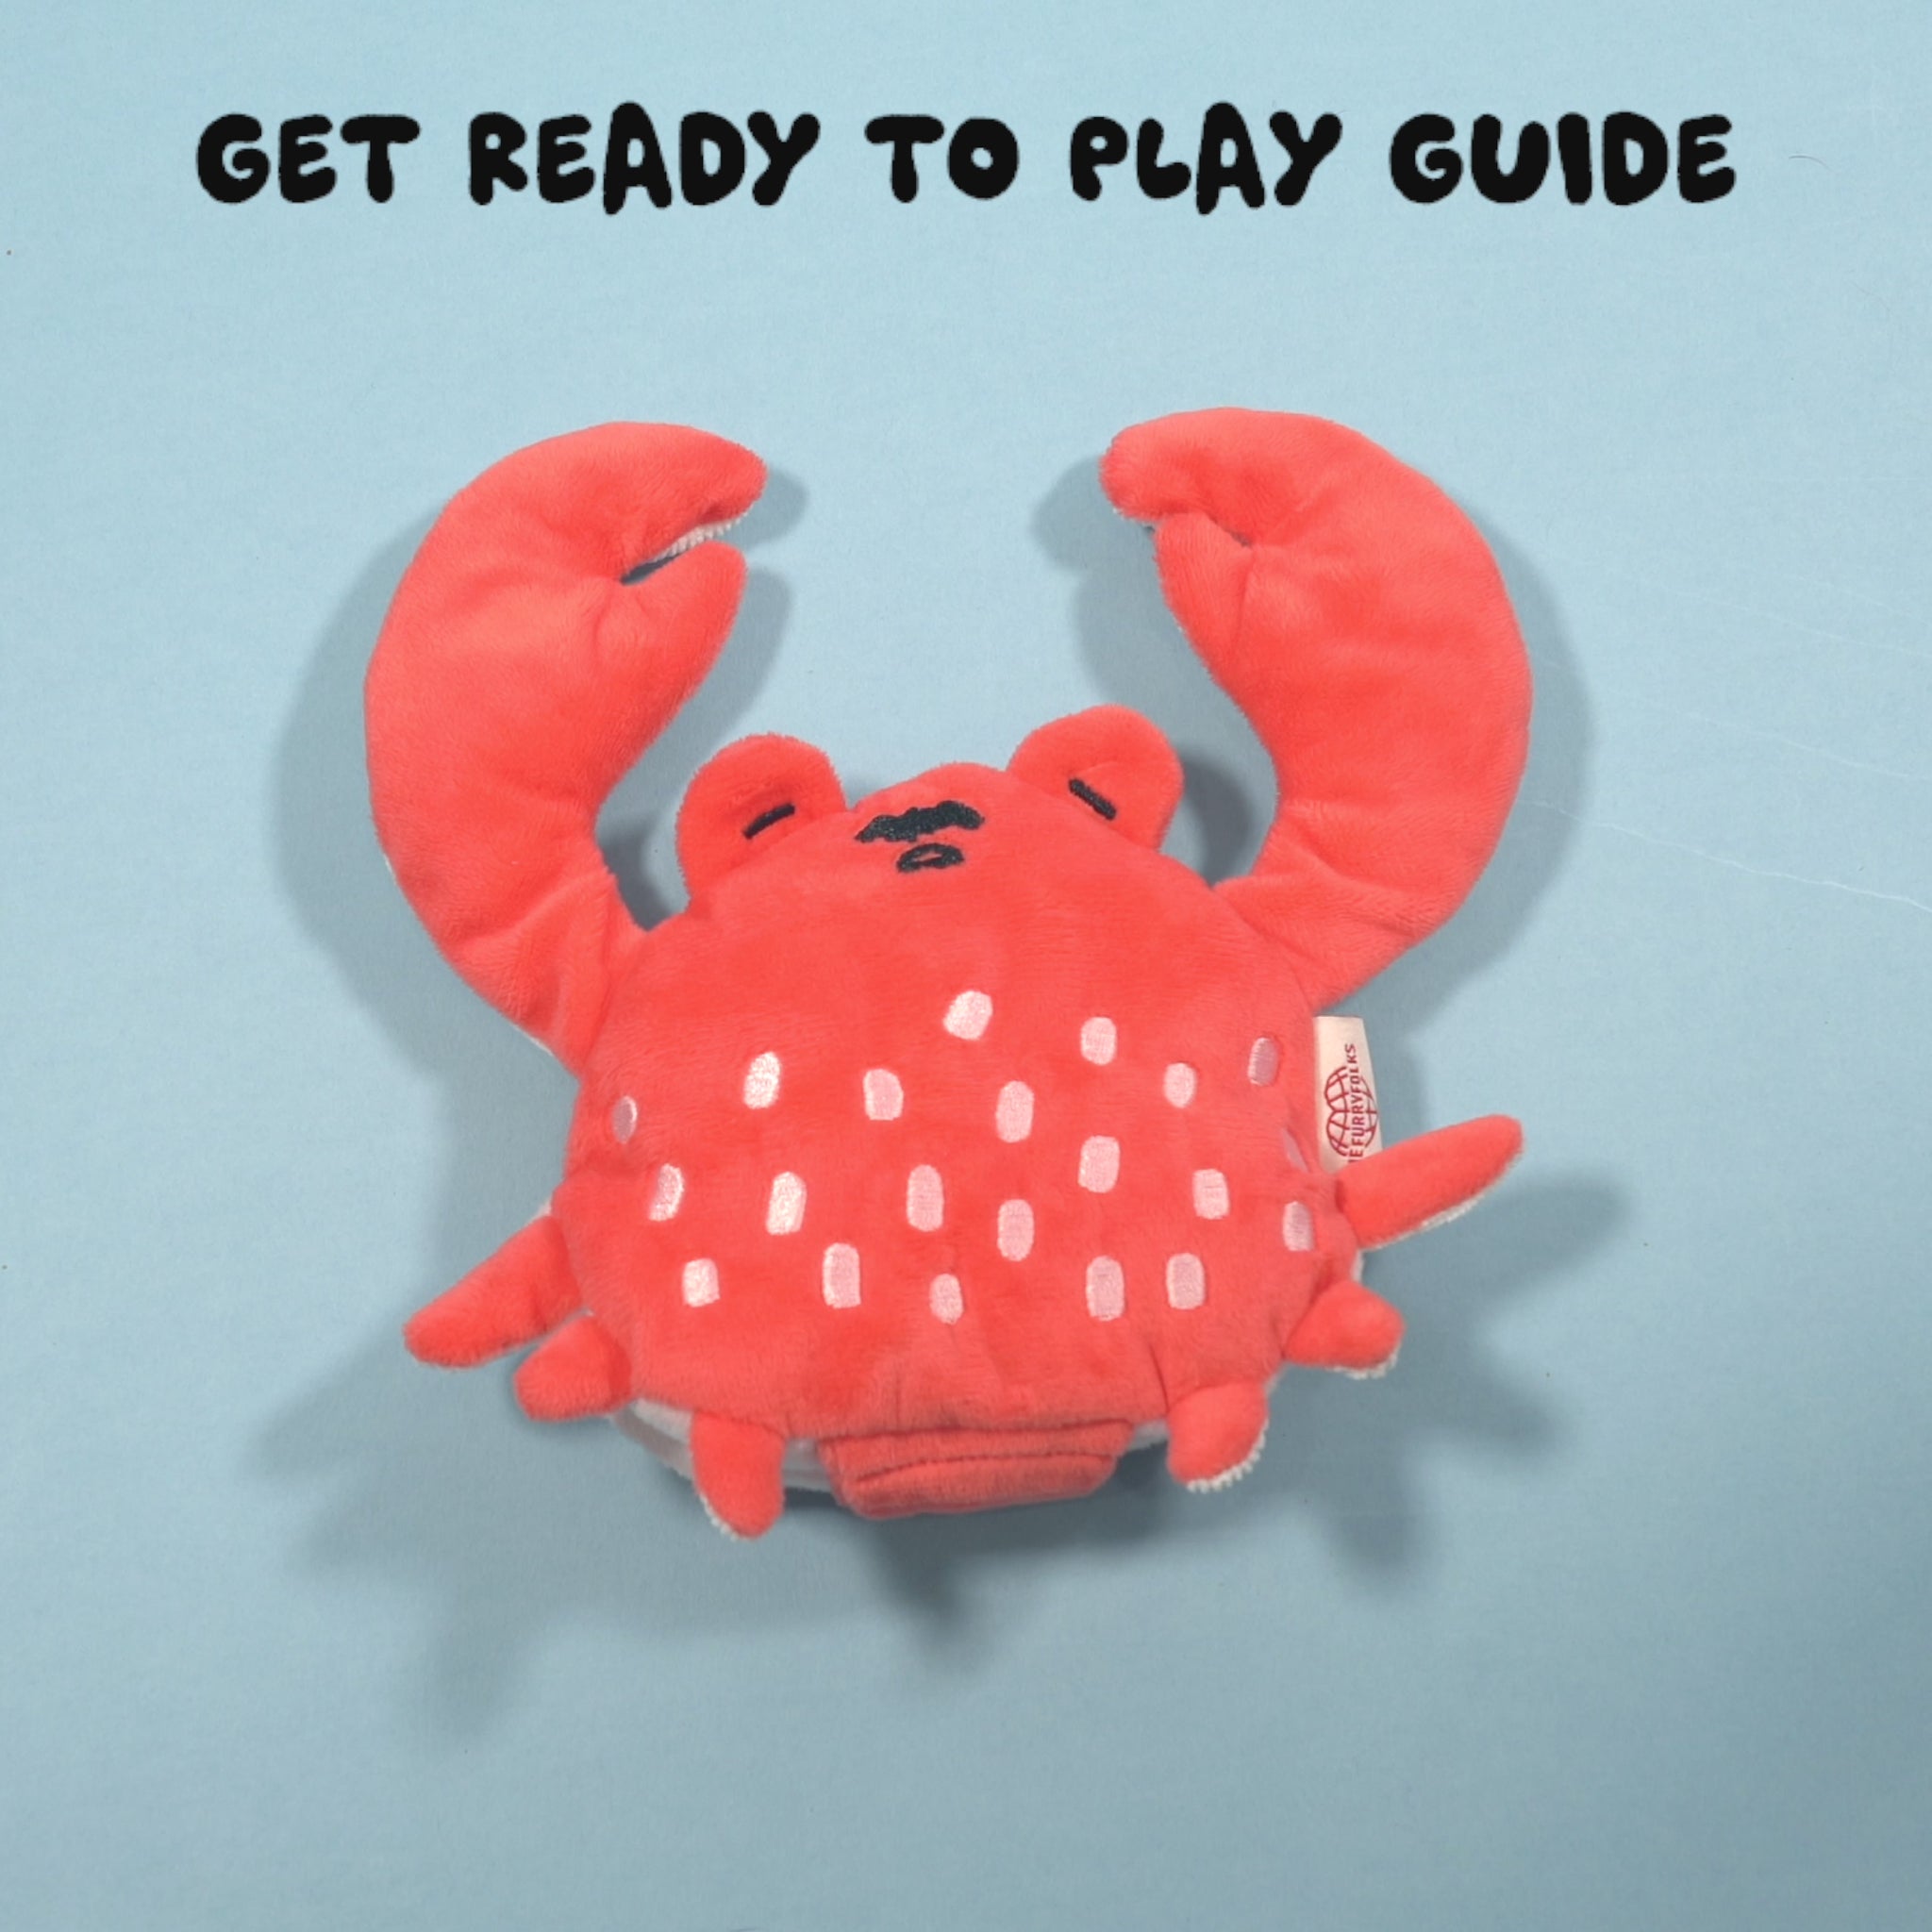 Video about " get ready to play guide"